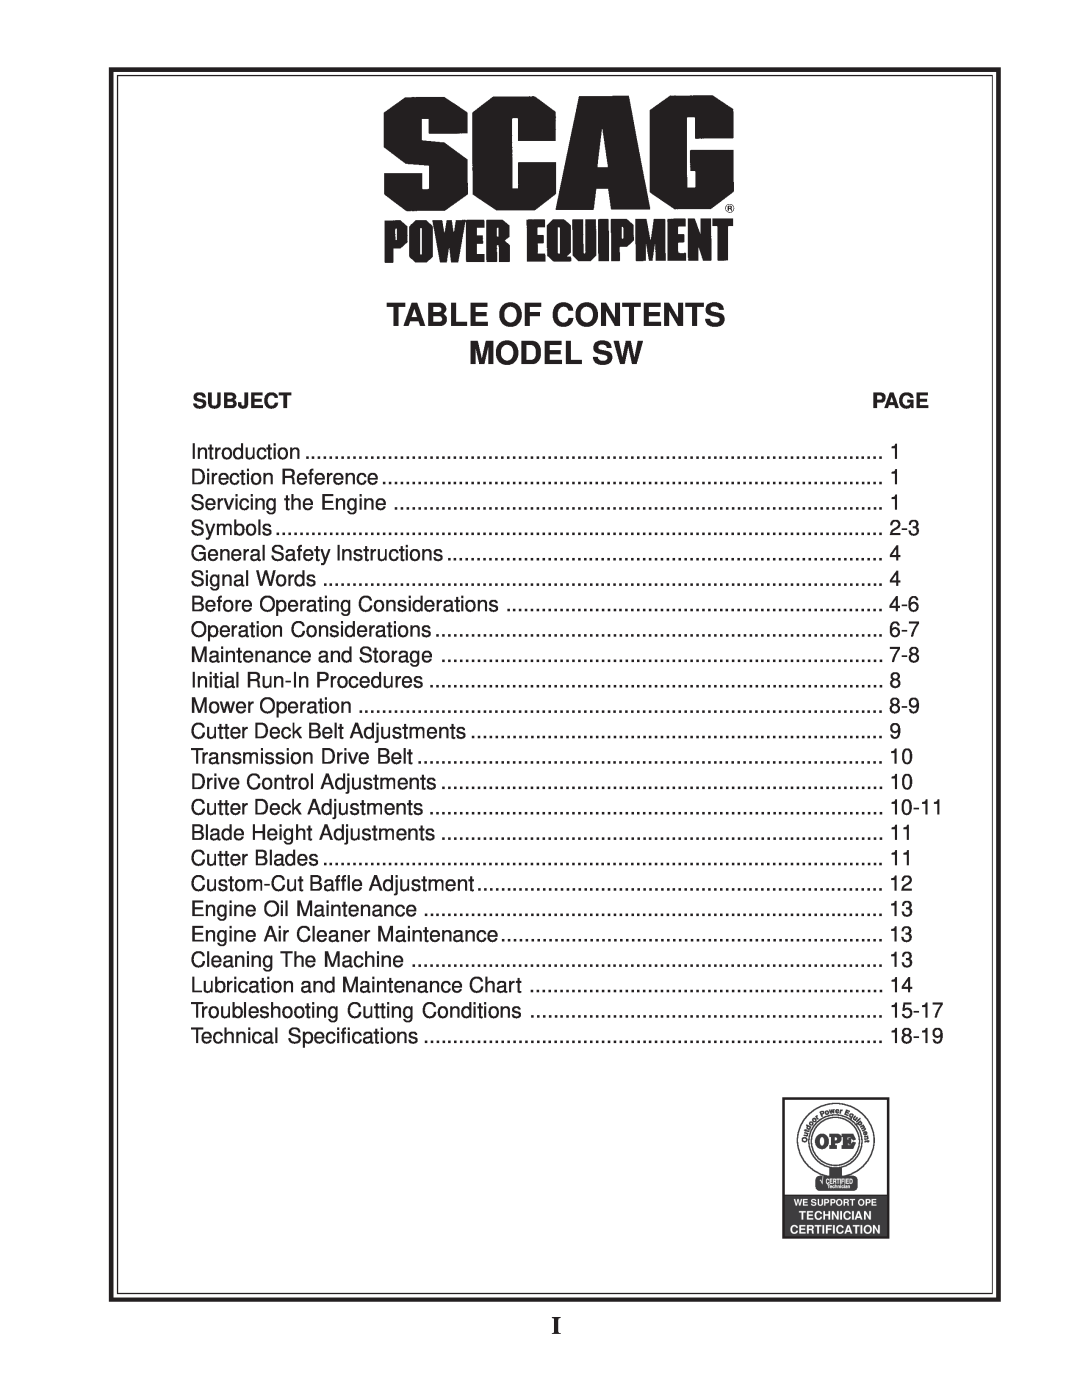 Scag Power Equipment SW manual Table Of Contents, Model Sw, Subject, Page 